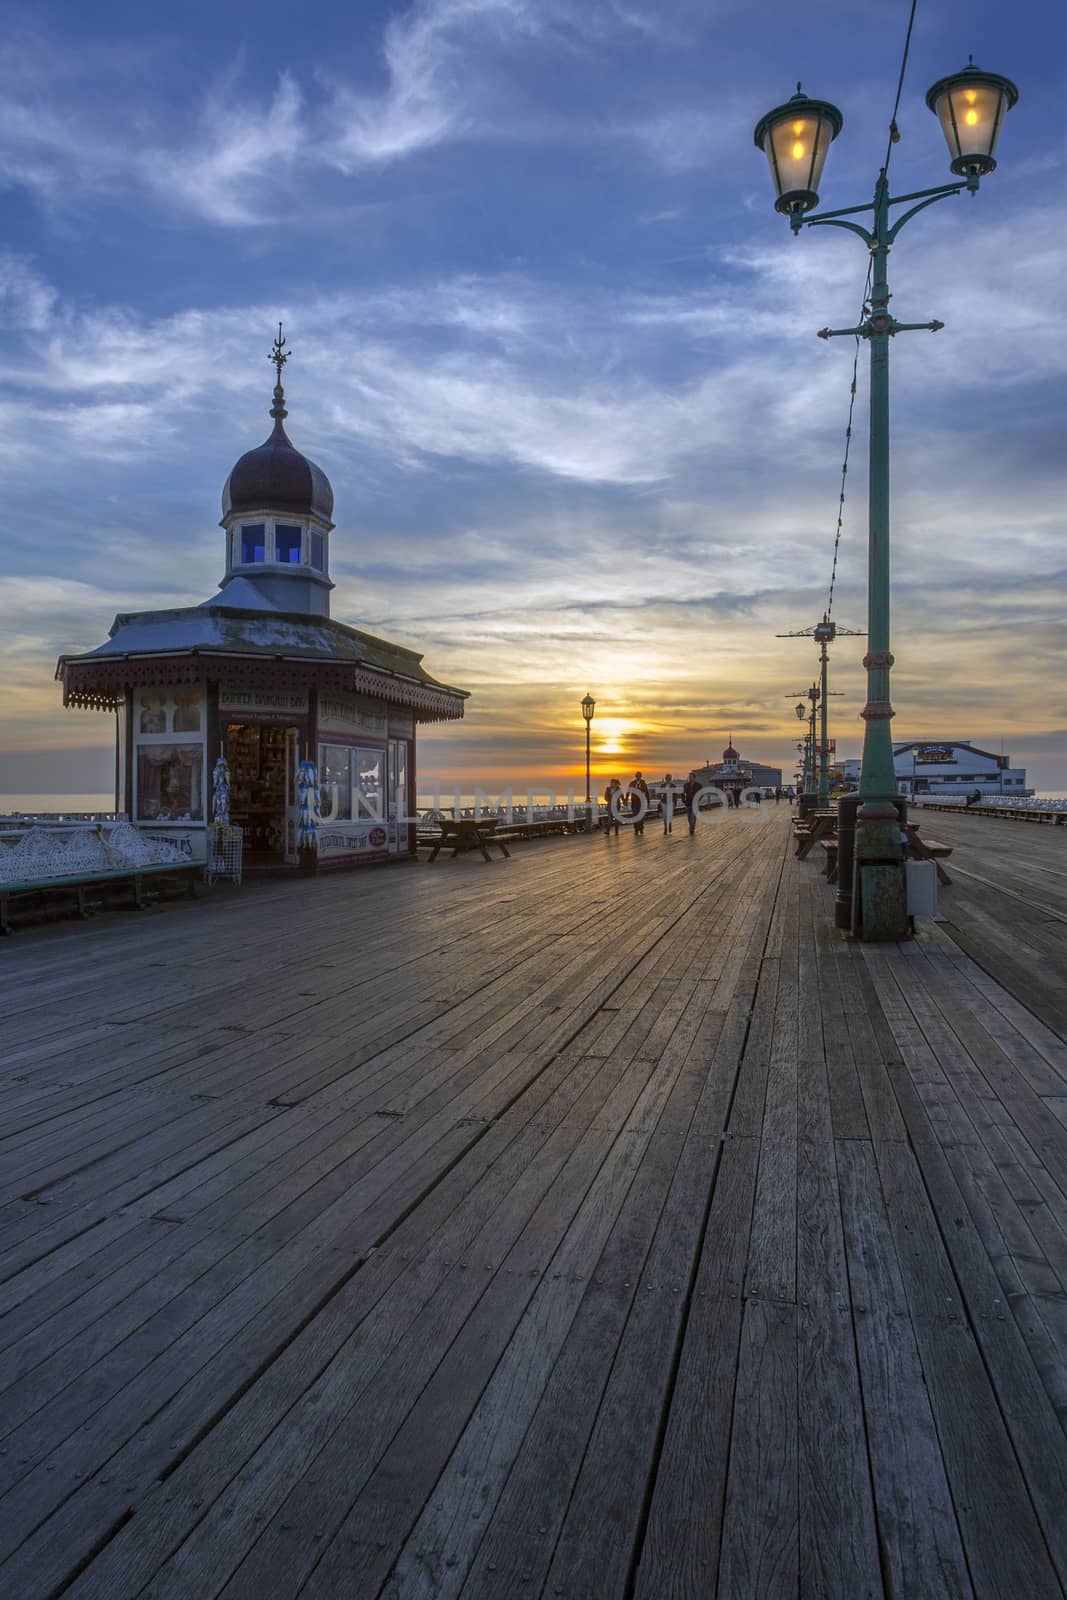 The old North Pier at sunset in Blackpool on the northwest coast of England.